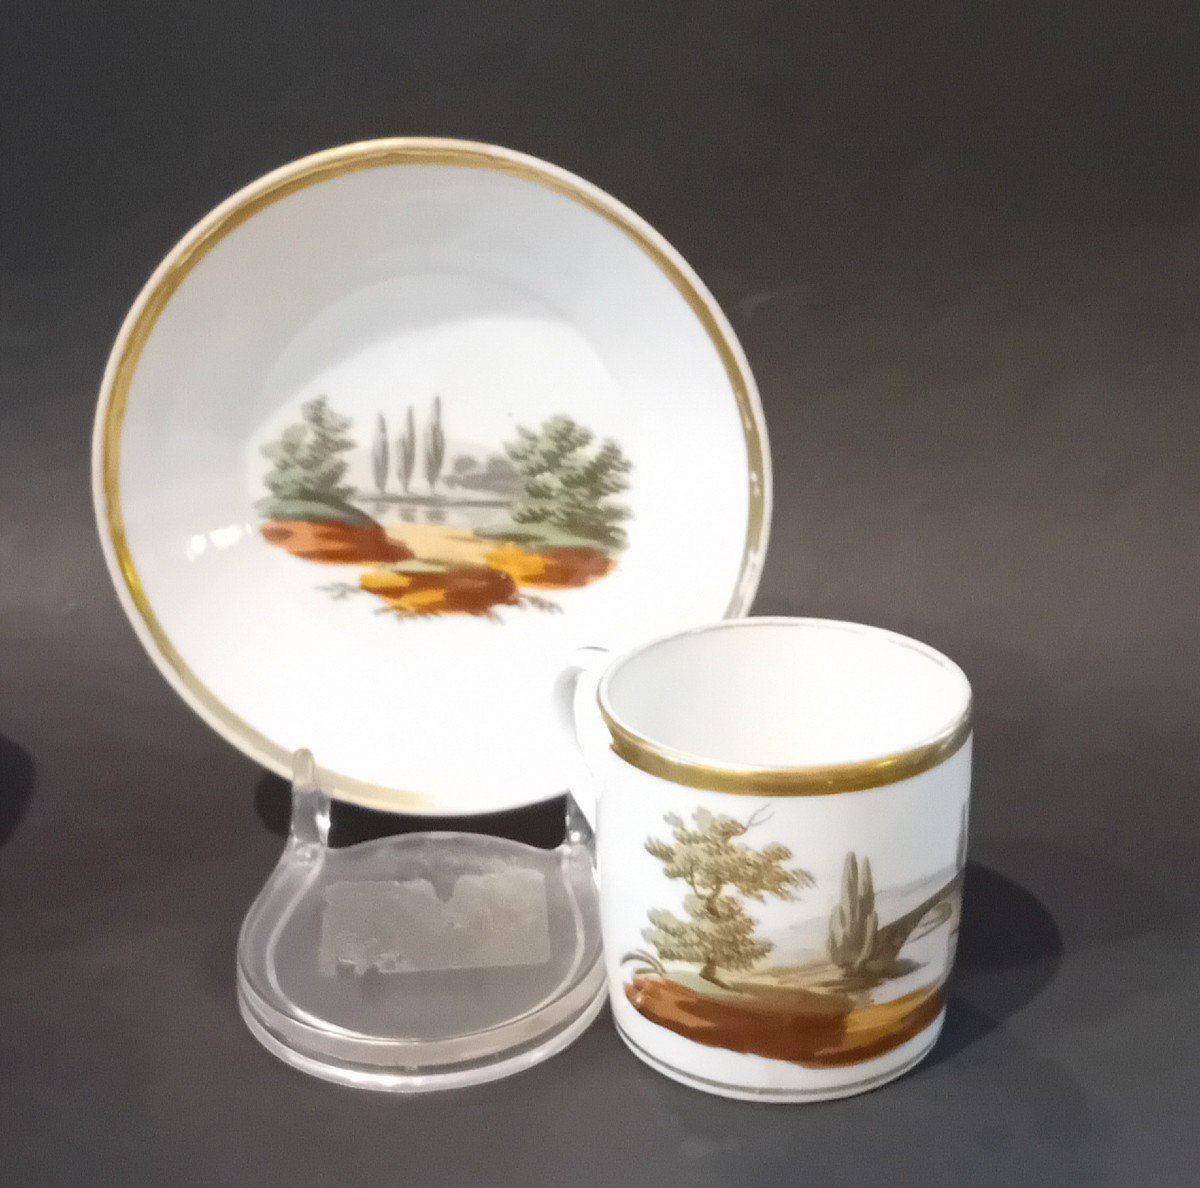 Beautiful Porcelain Decorated Cup And Plate